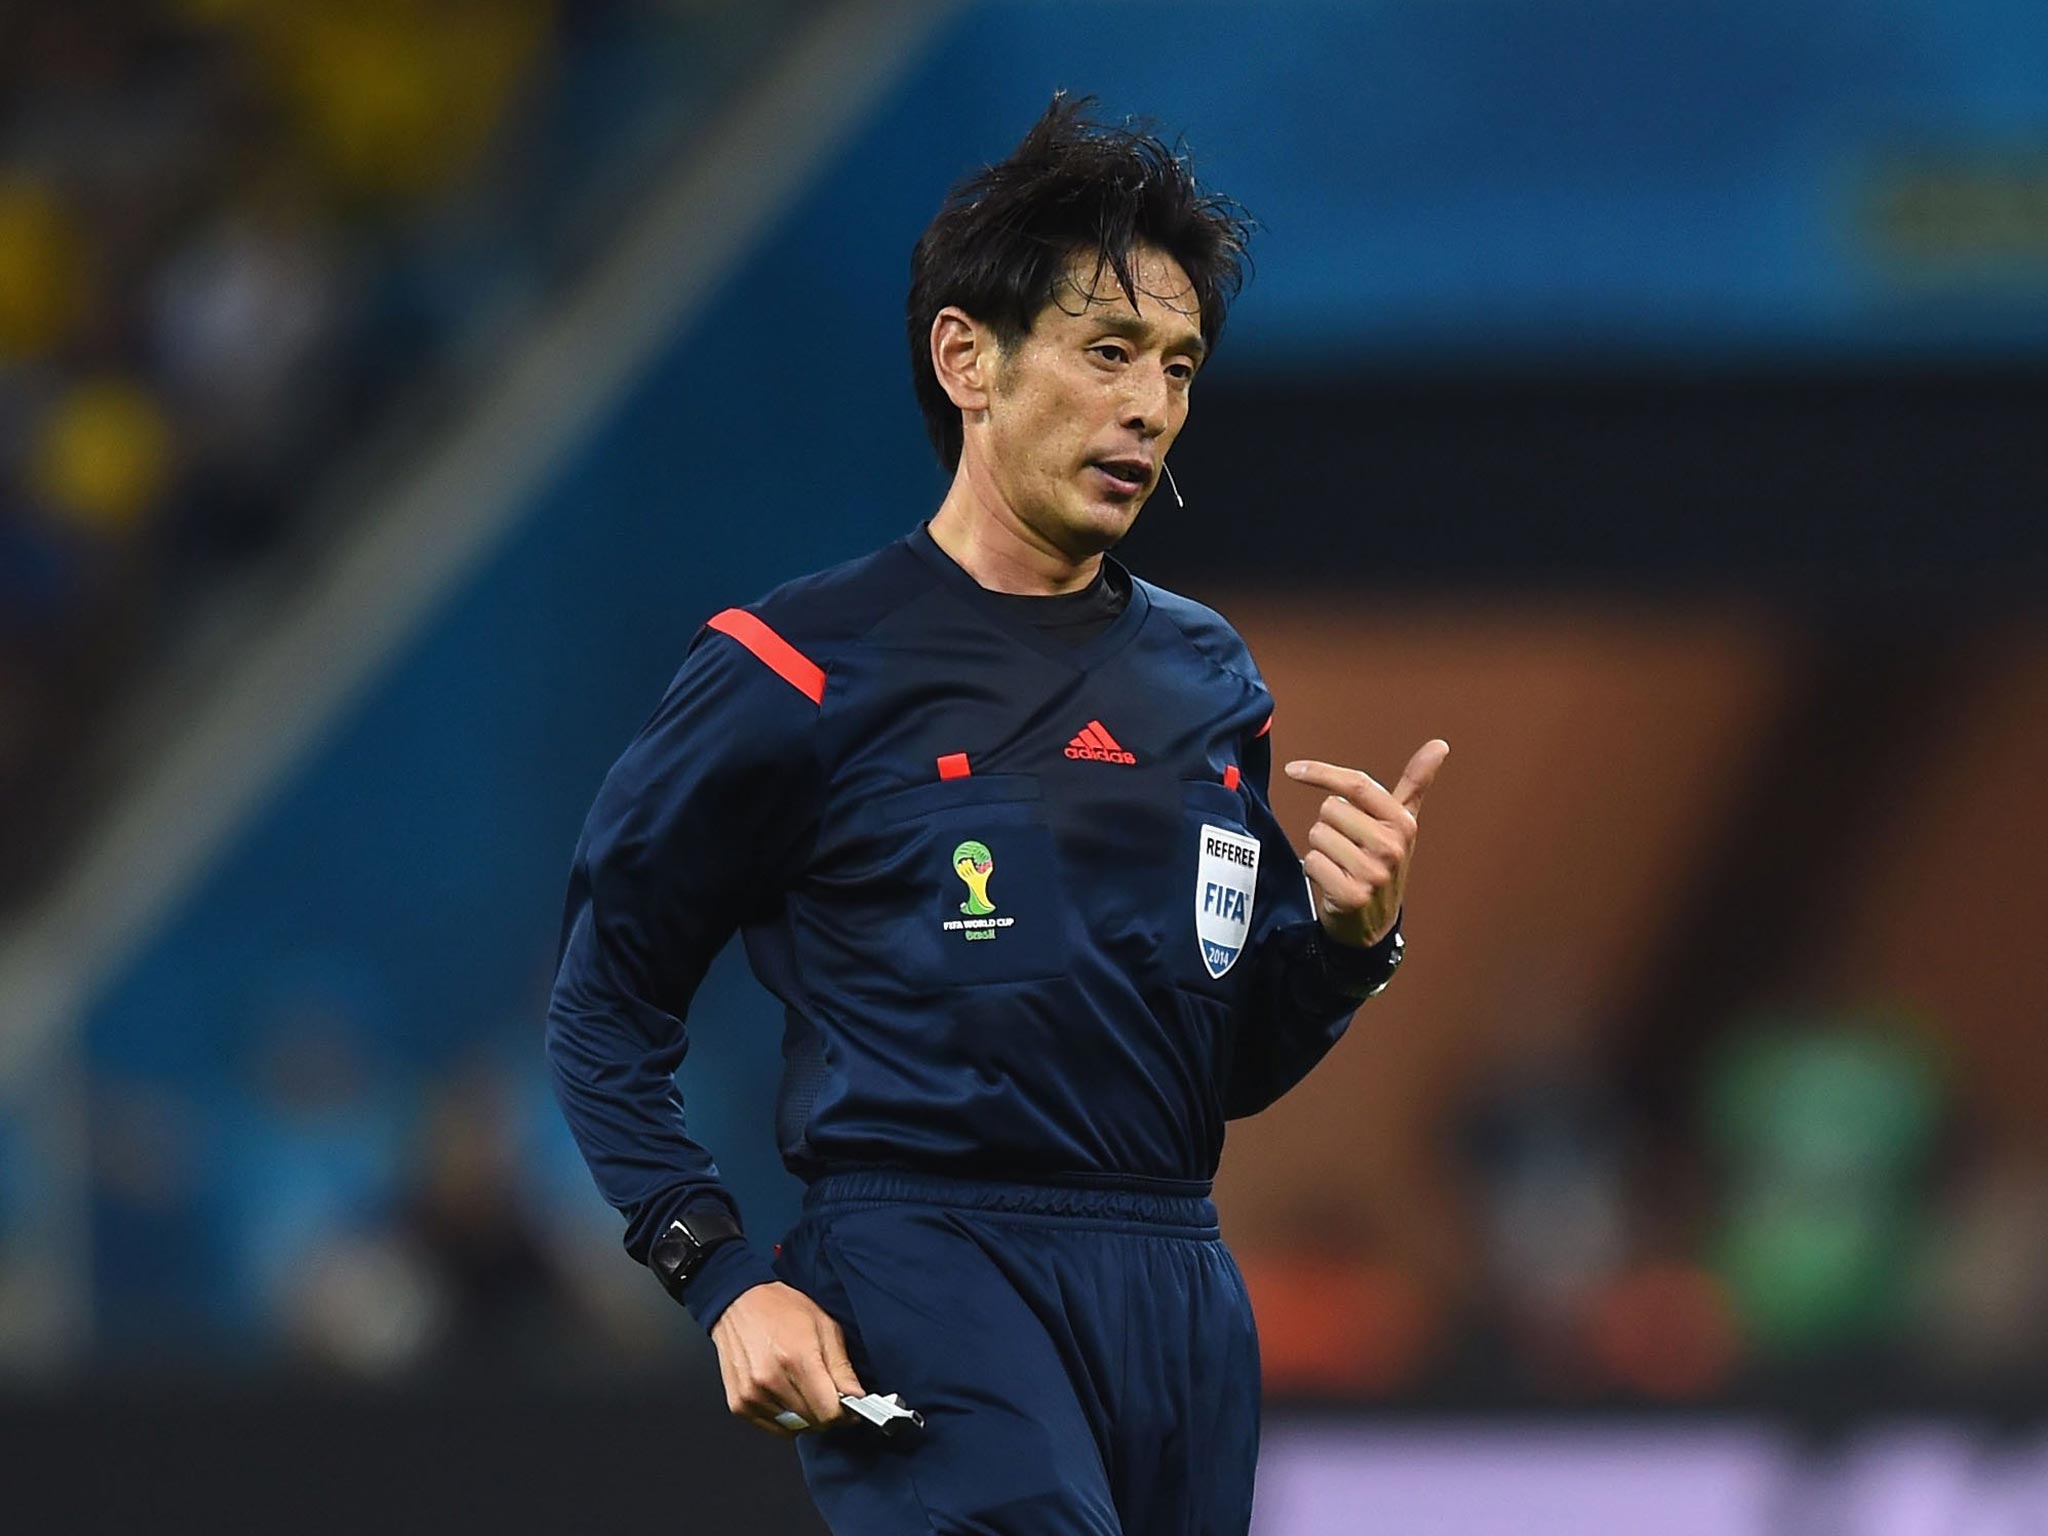 Japanese referee Nishimura, who had a rather peculiar interpretation of the rules